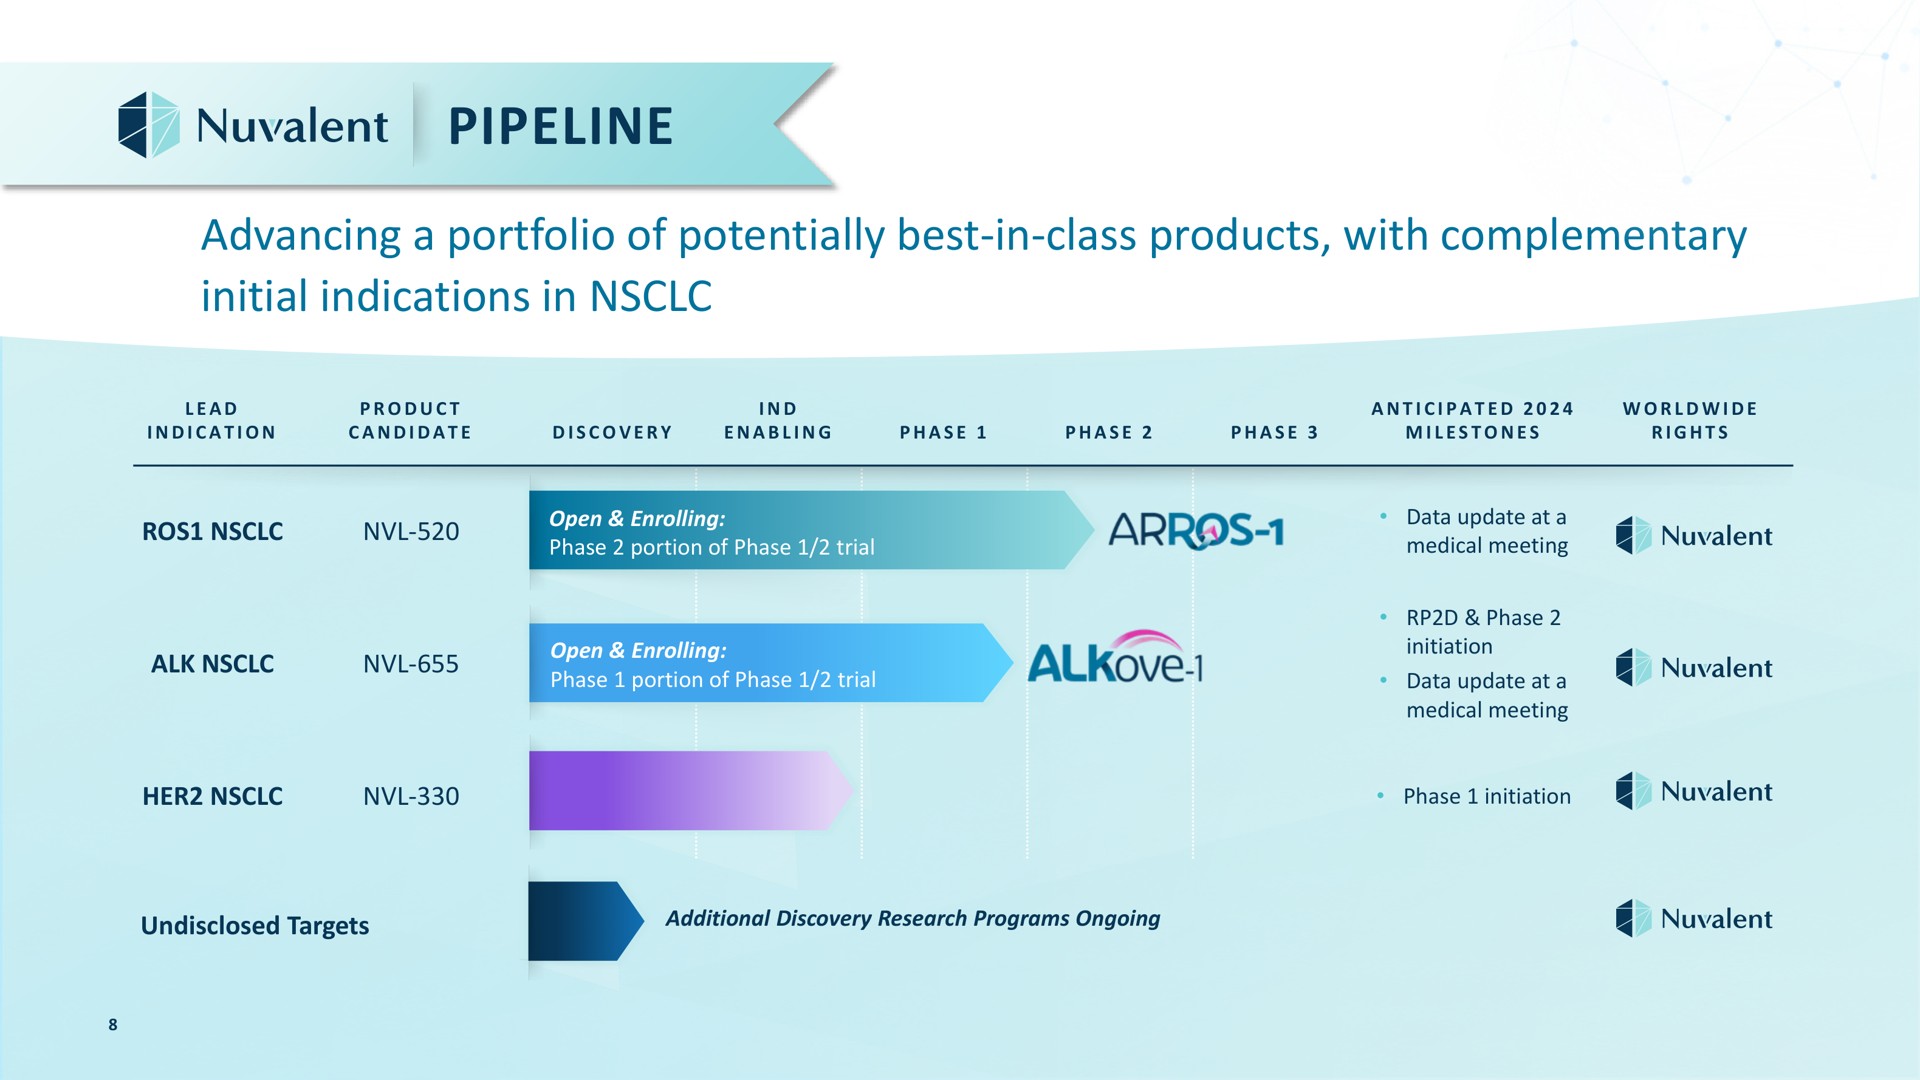 pipeline advancing a portfolio of potentially best in class products with complementary initial indications in lead indication product candidate discovery enabling phase phase phase anticipated milestones rights open enrolling phase portion phase trial data update at medical meeting alk open enrolling phase portion phase trial phase initiation data update at medical meeting her phase initiation undisclosed targets additional discovery research programs ongoing | Nuvalent